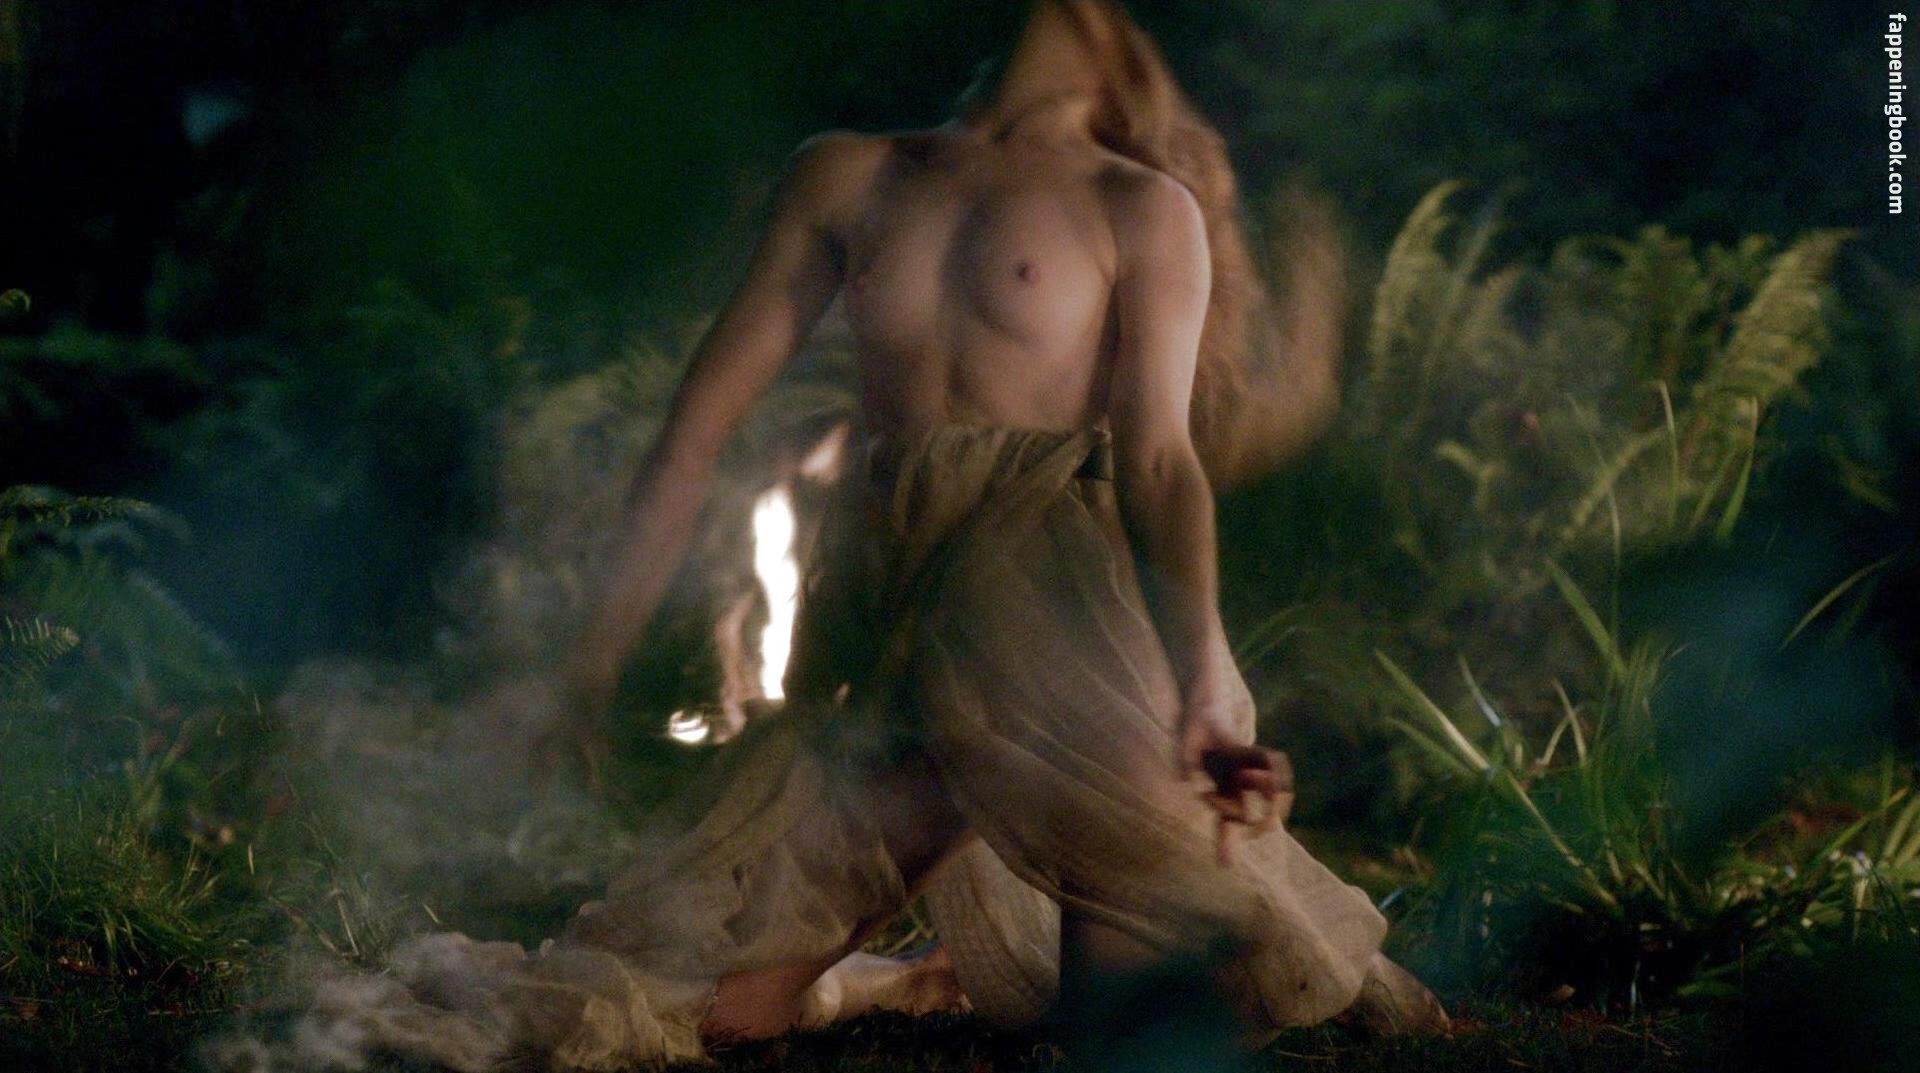 Lotte Verbeek Nude, The Fappening - Photo #350607 - FappeningBook.